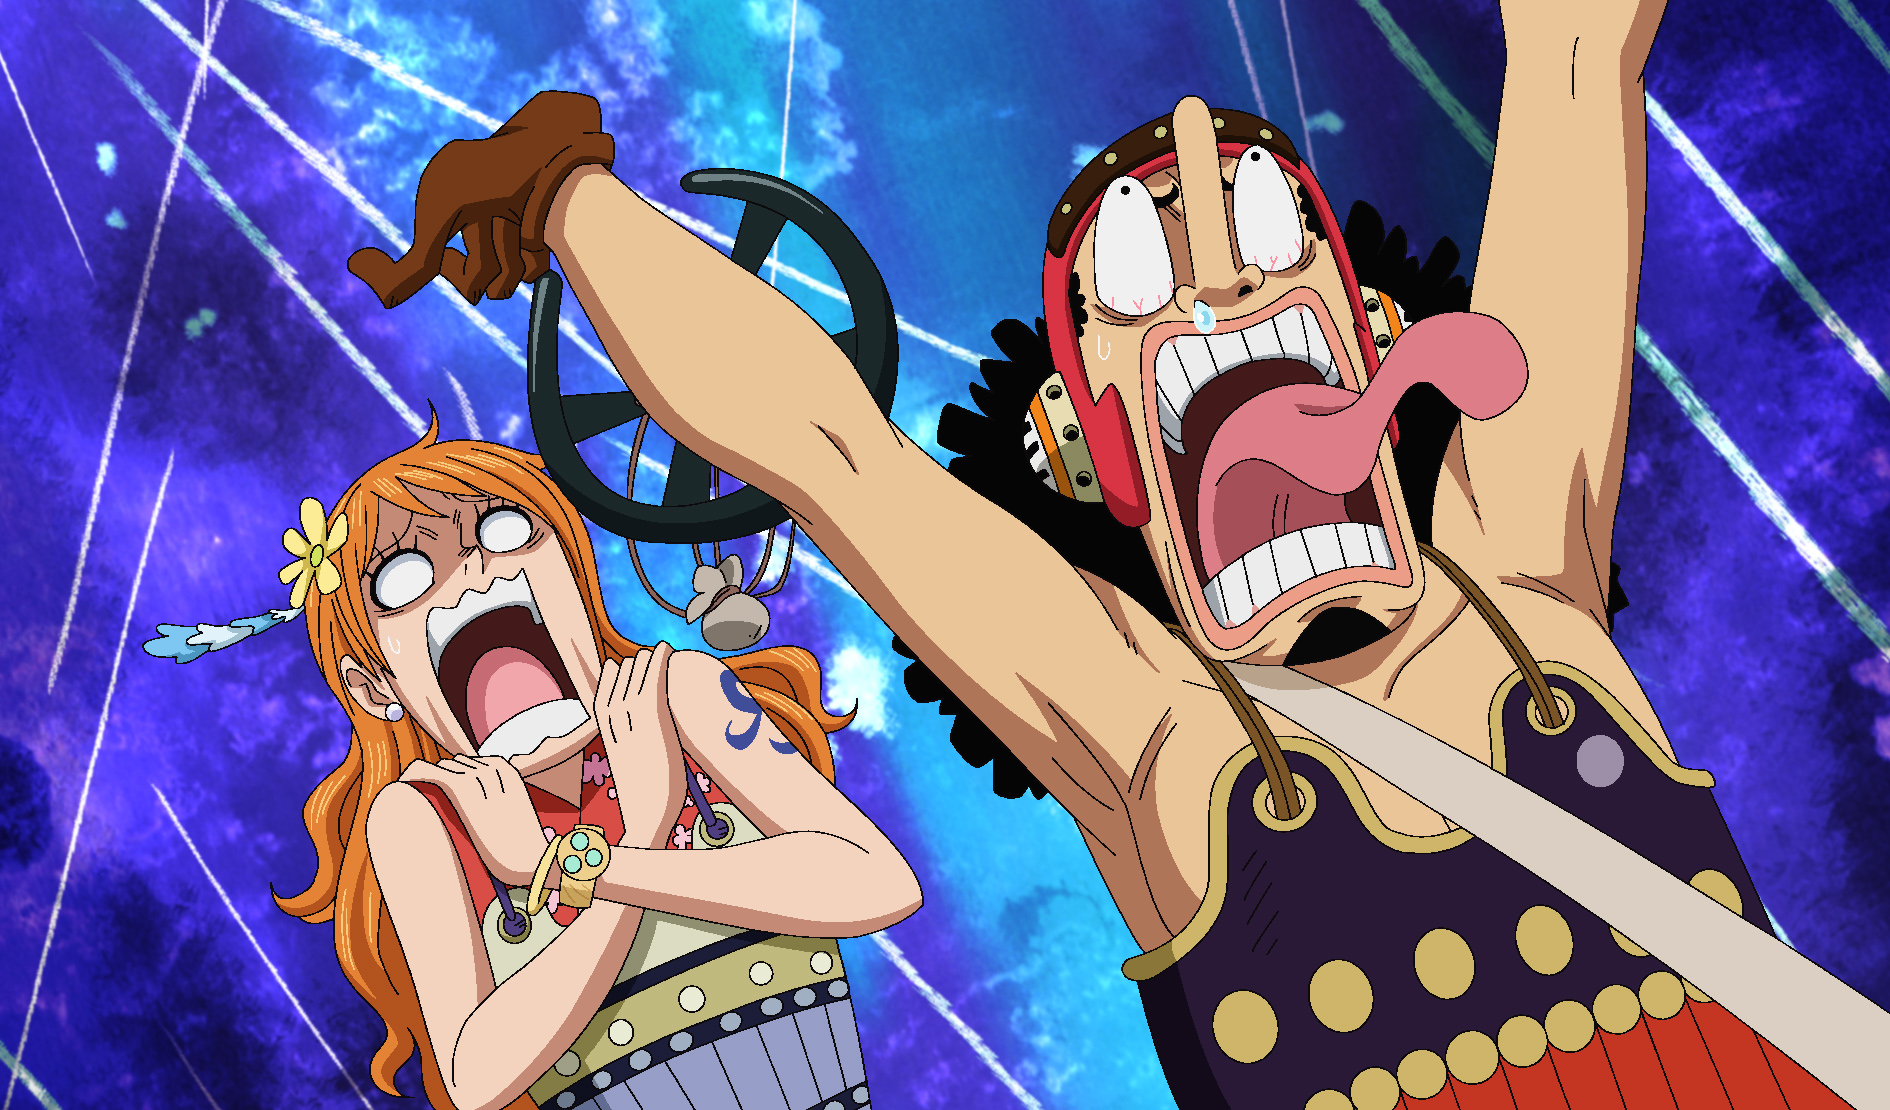 Usopp and Nami reacting in cartoonish manner, which is how you'll react while reading One Piece 1056 spoilers on Reddit